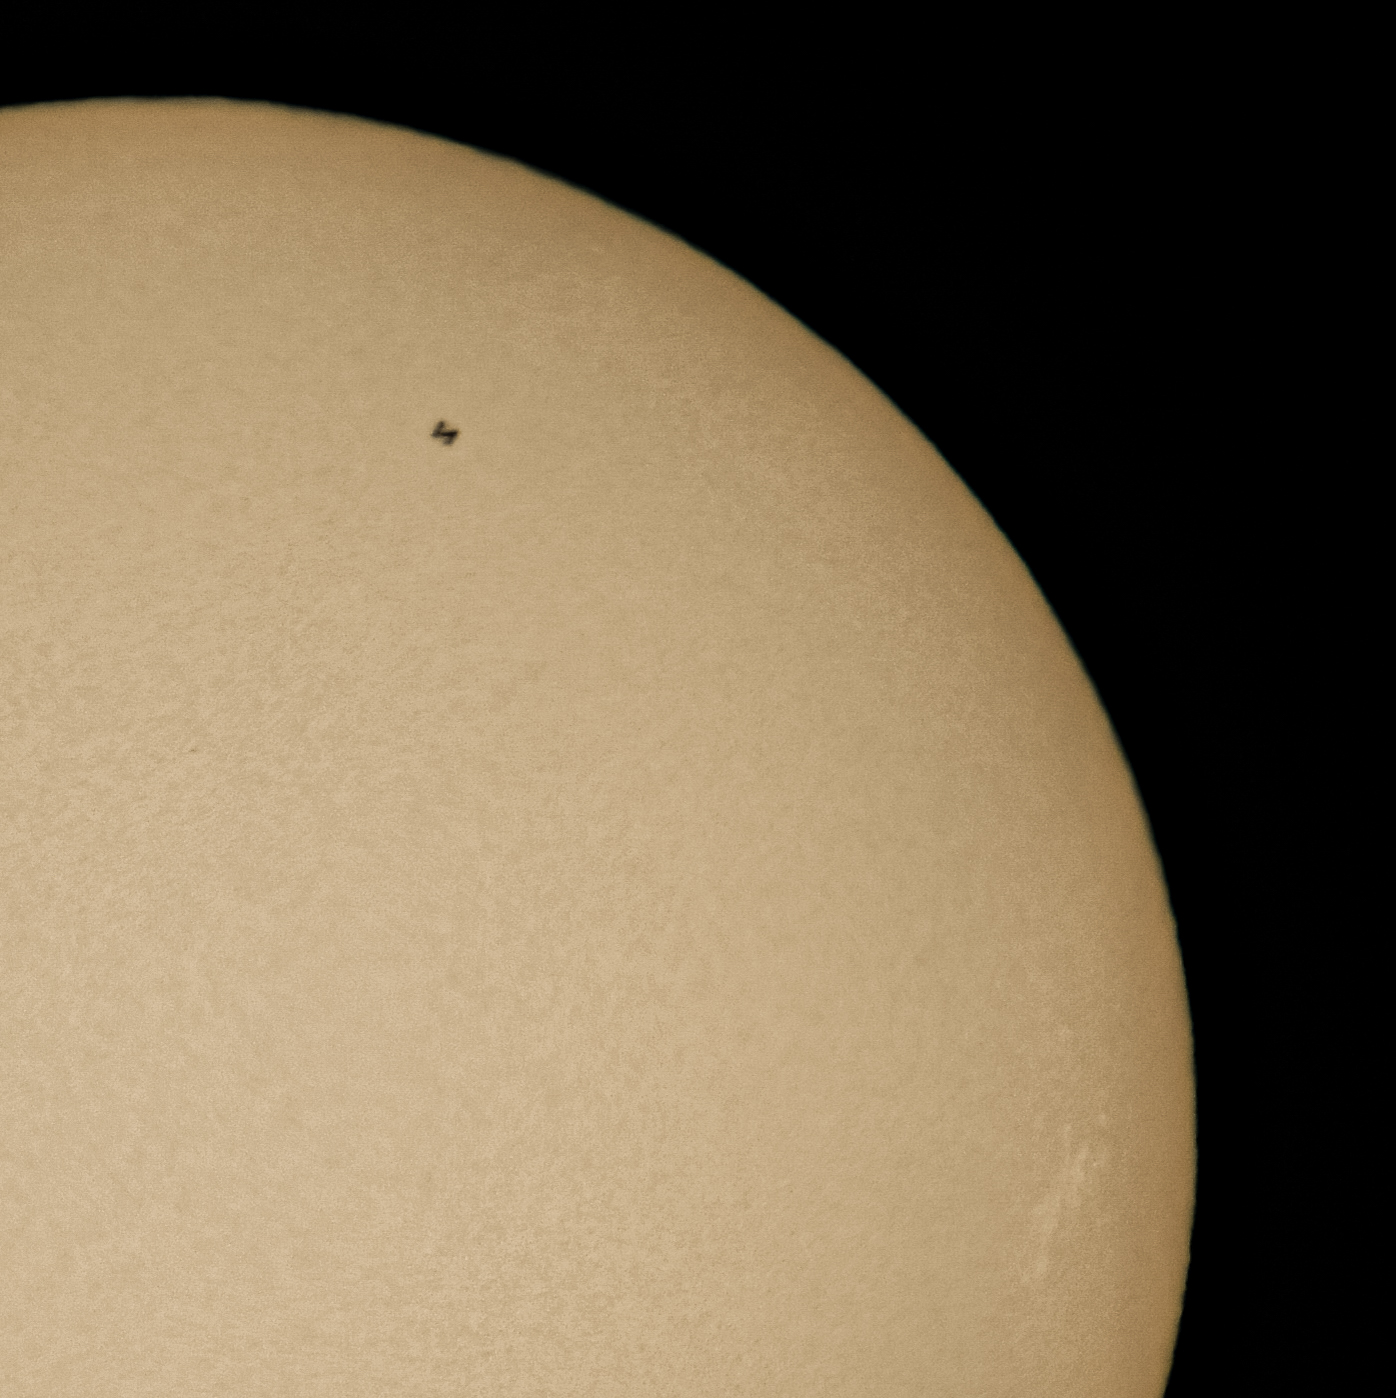 ISS passage in front of the sun...